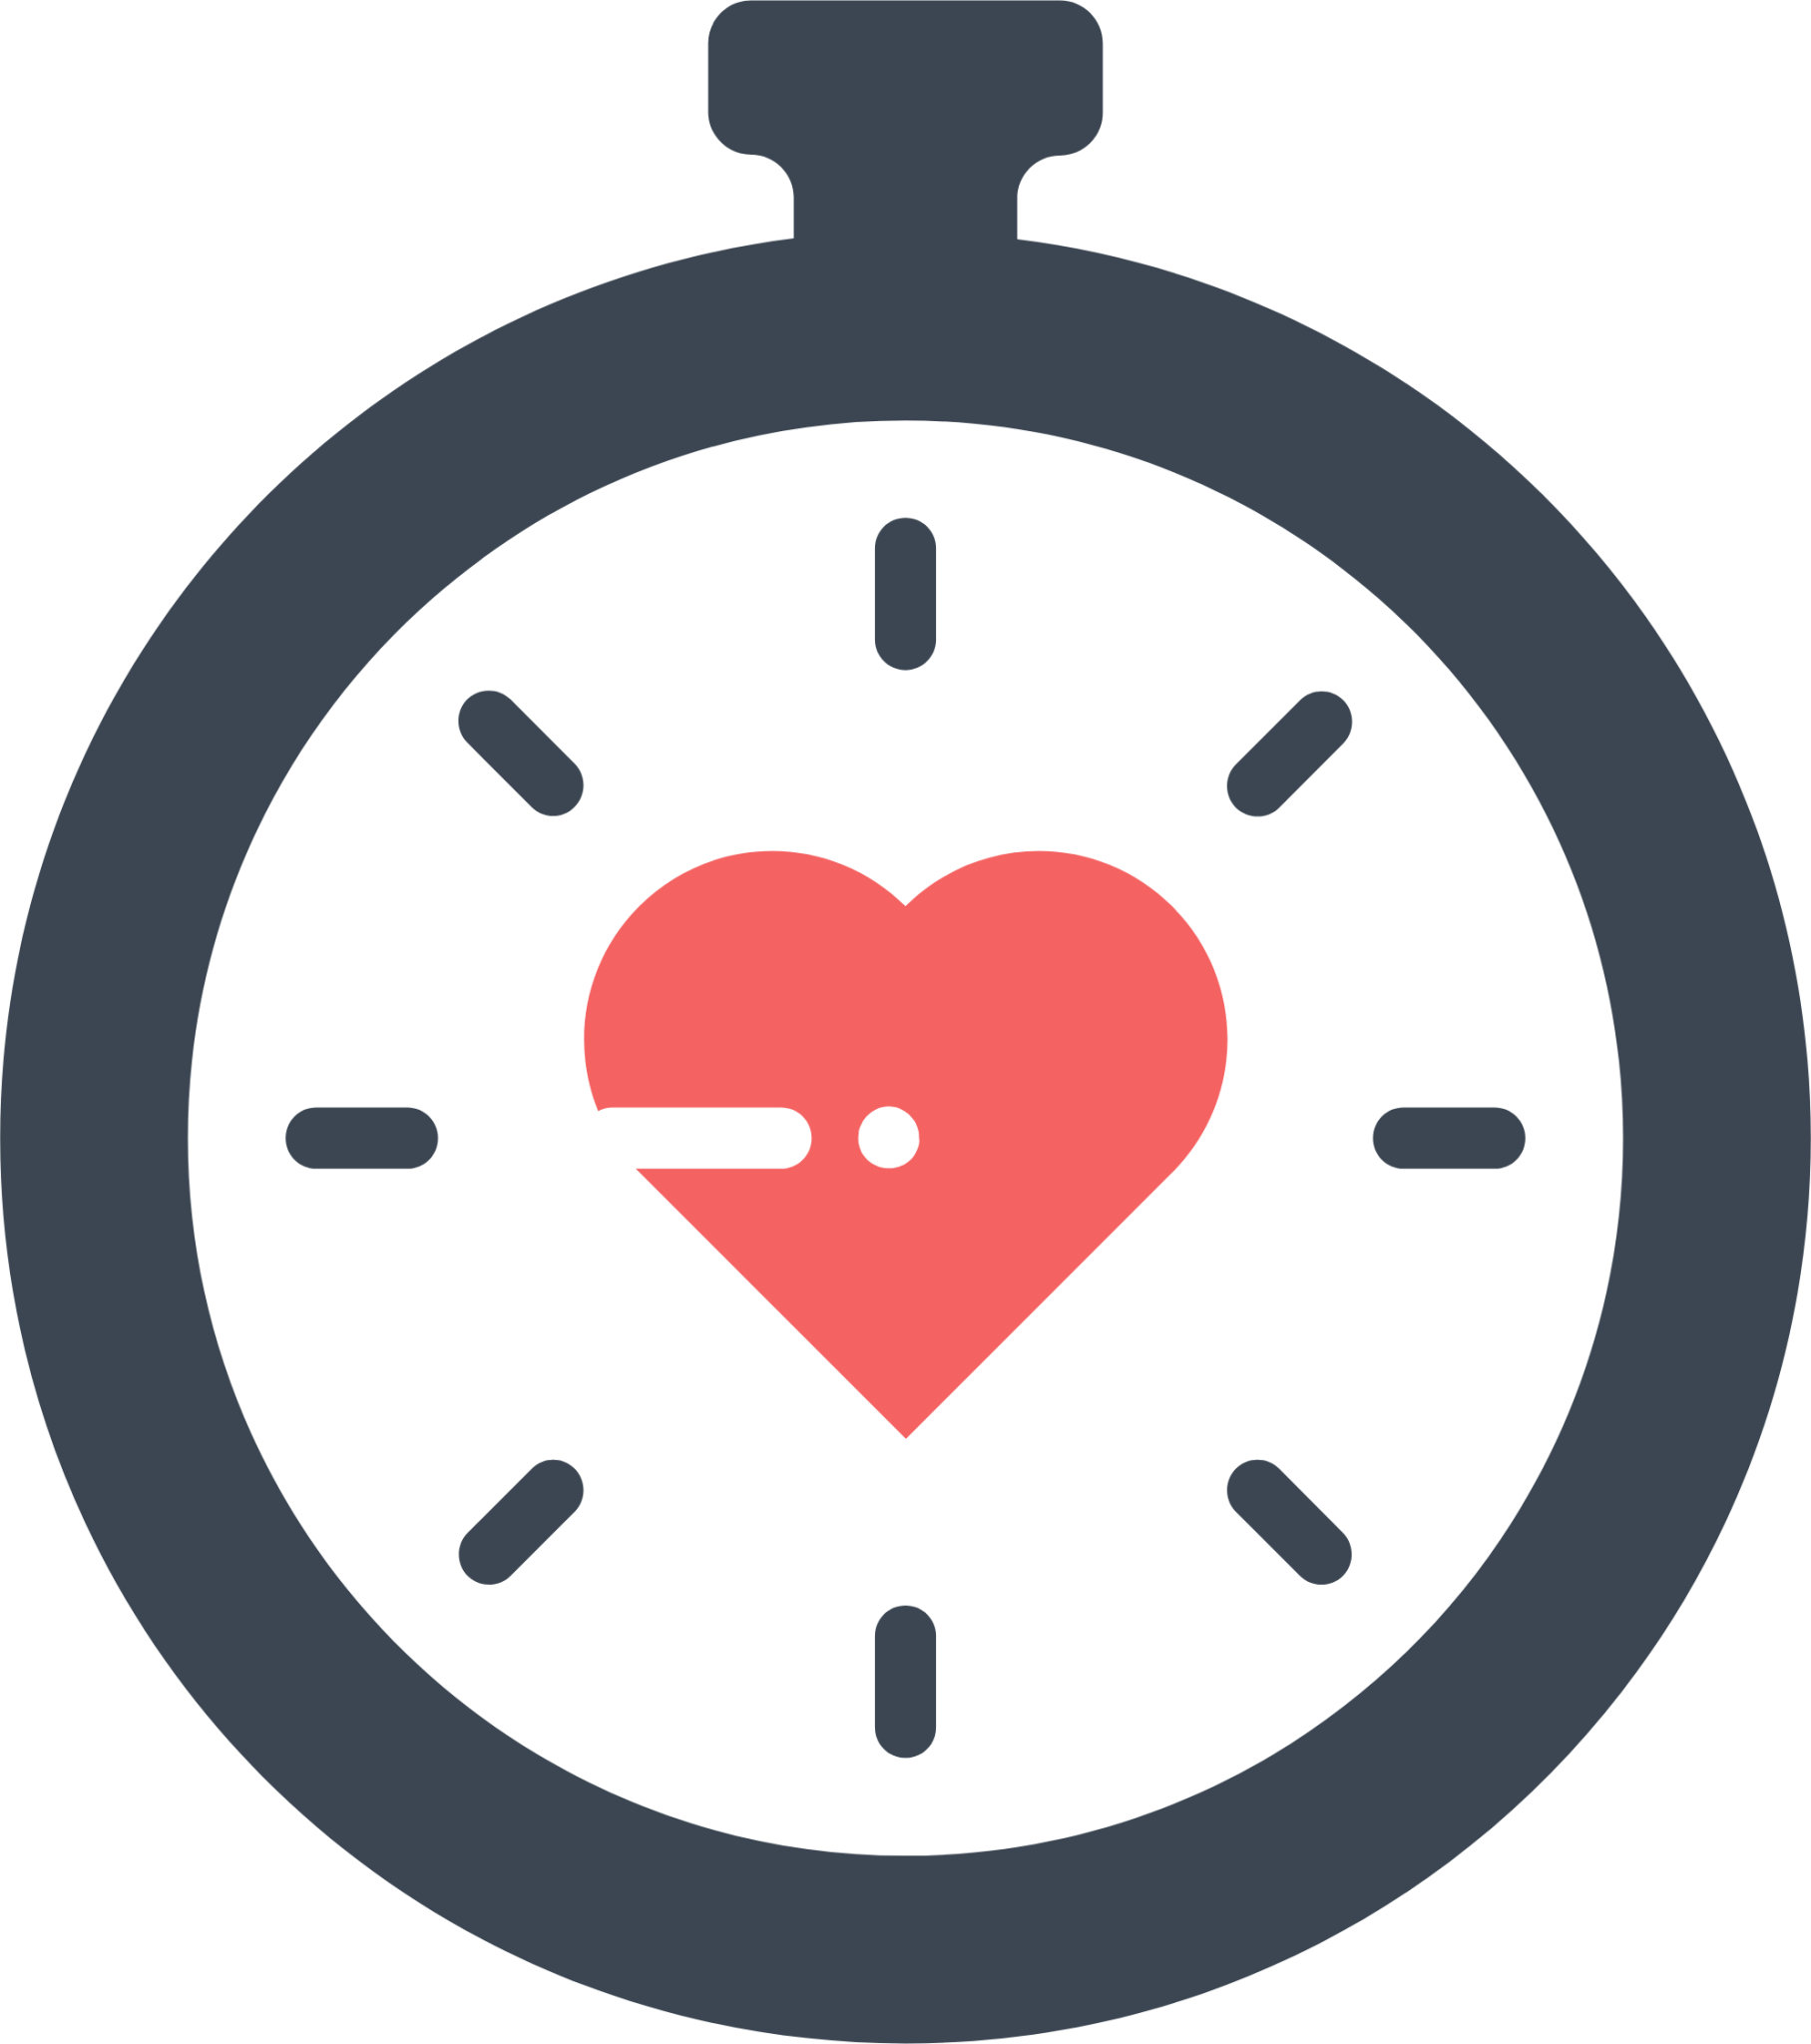 healthcare hospital medical 47 clock time heart icon